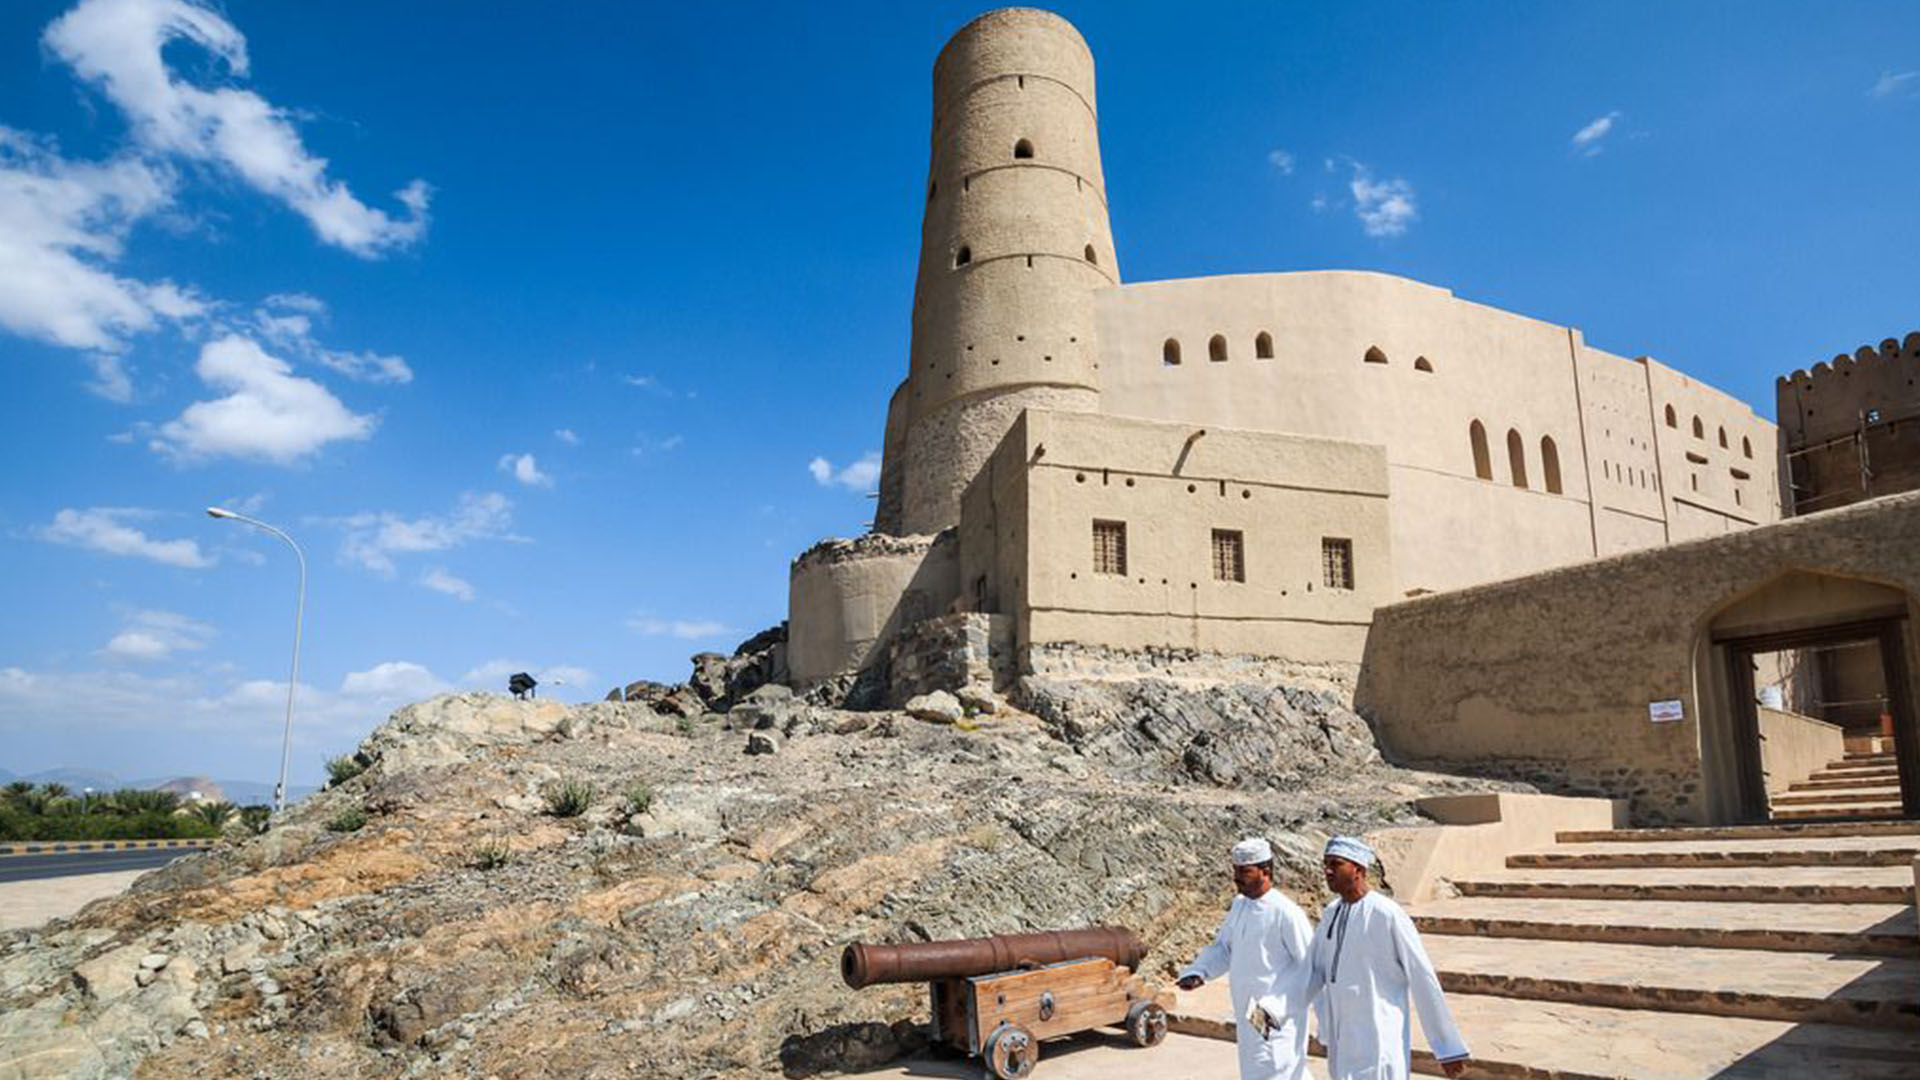 A panoramic photograph immortalizes the commanding presence of Bahla Fort, as it dominates the skyline of the town, while locals descend the stairway, adding a sense of movement and vitality to the scene.